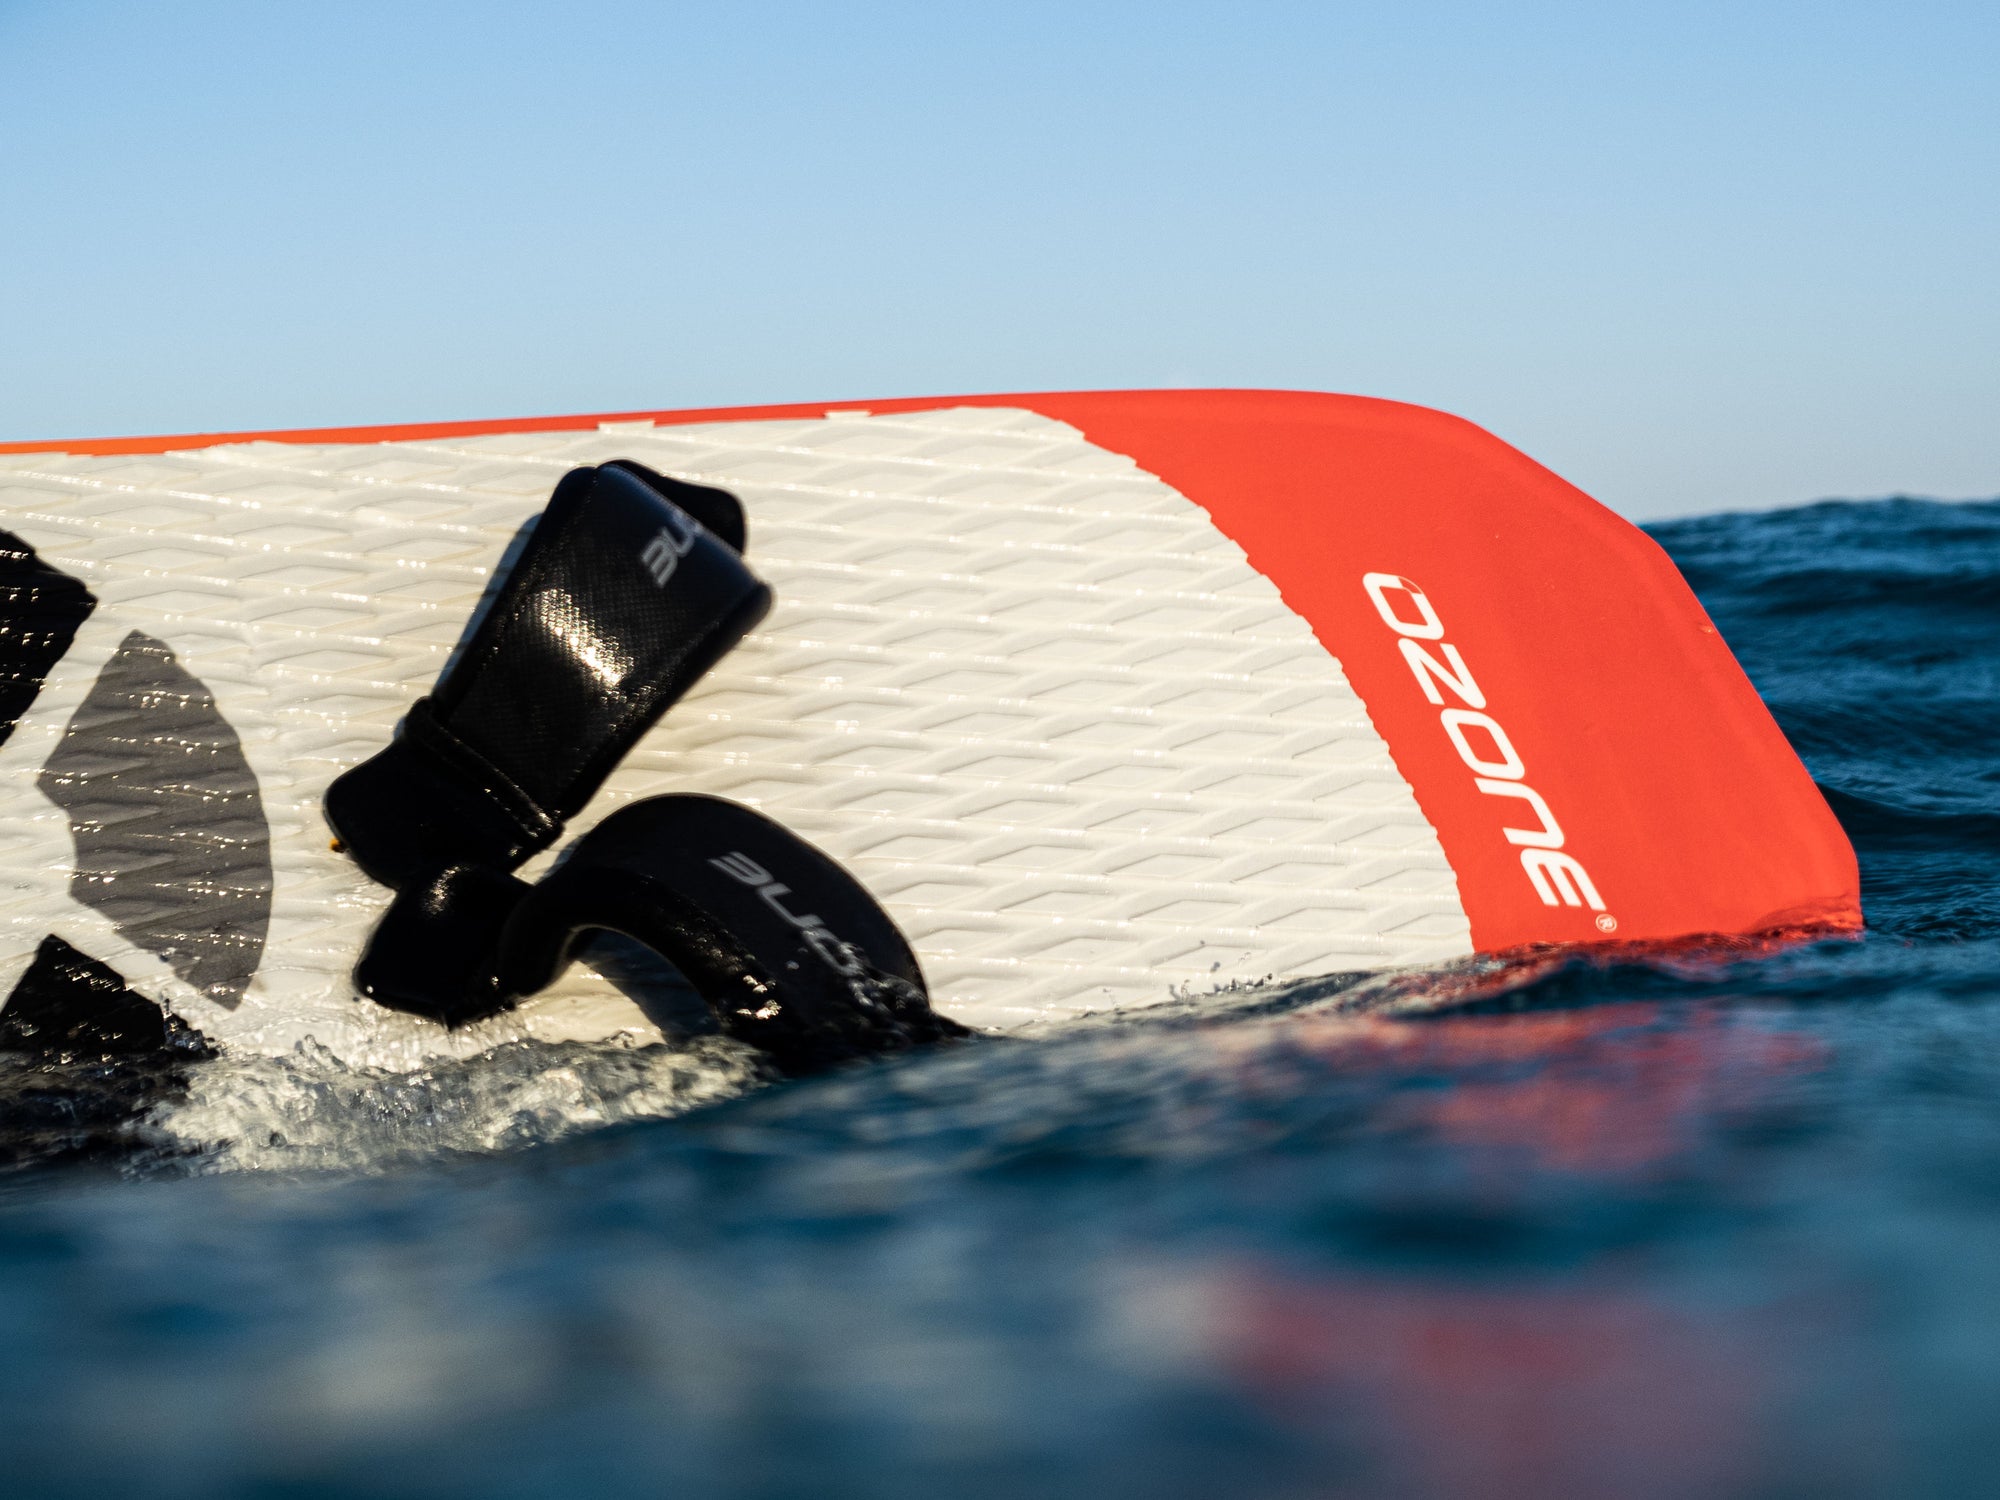 Ozone Apex V1 kitesurfing foil board in the water with straps on.